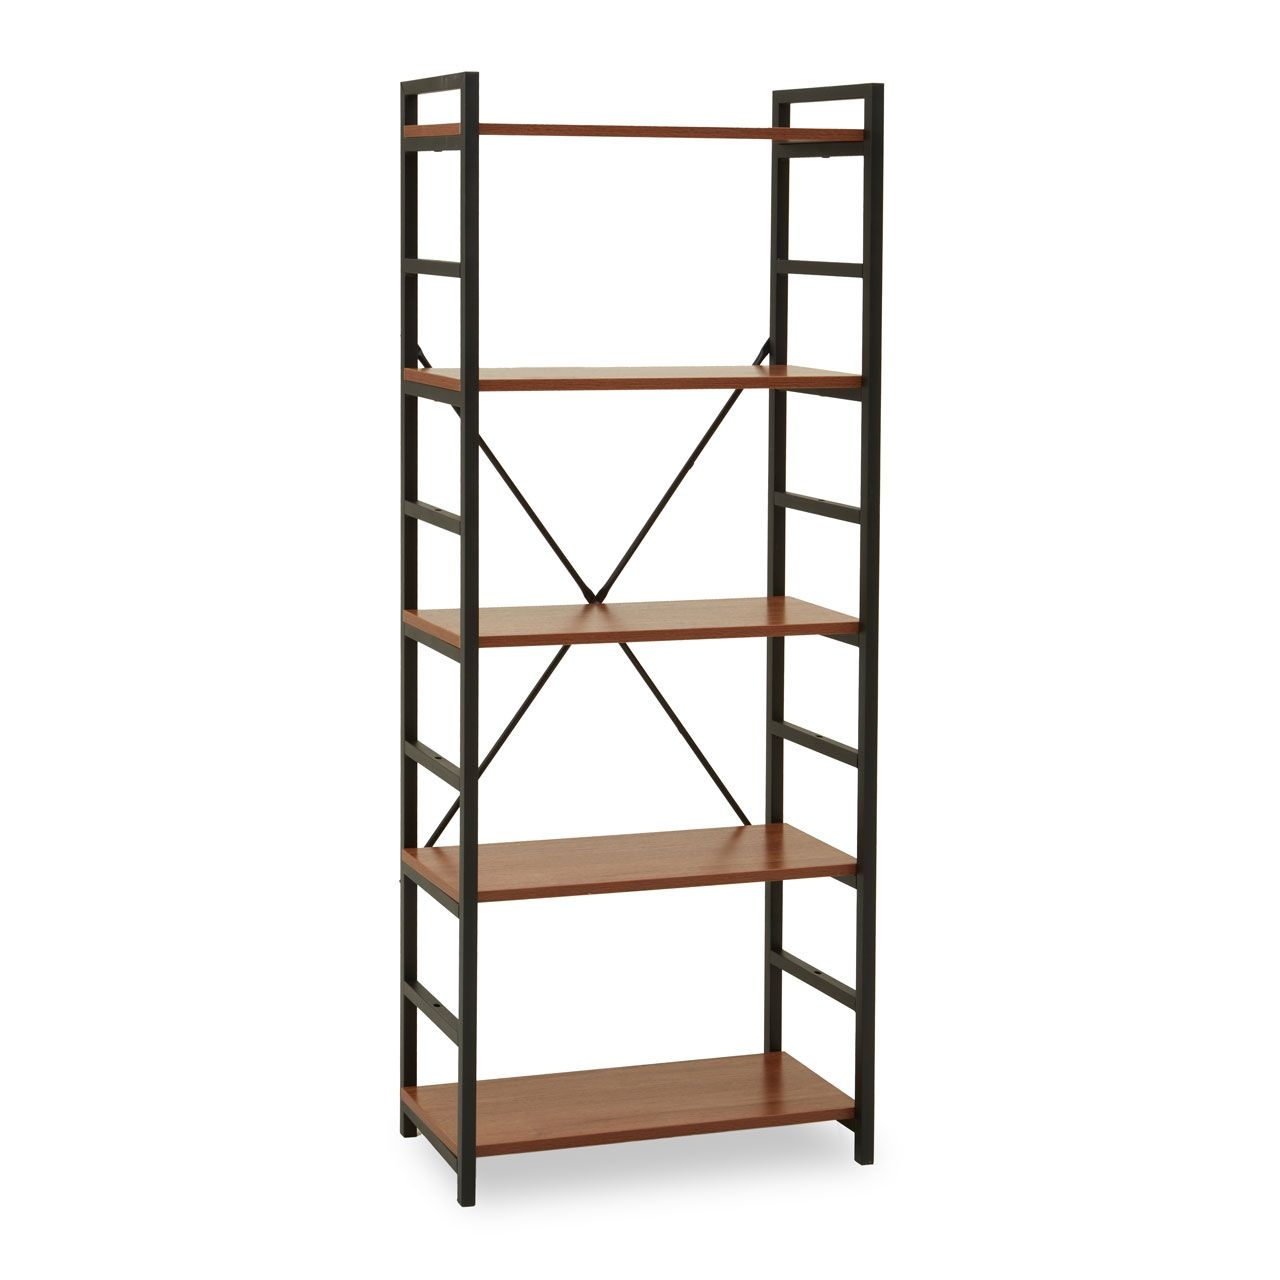 Laxton 5 Tier Wooden Shelving Unit In Red Pomelo